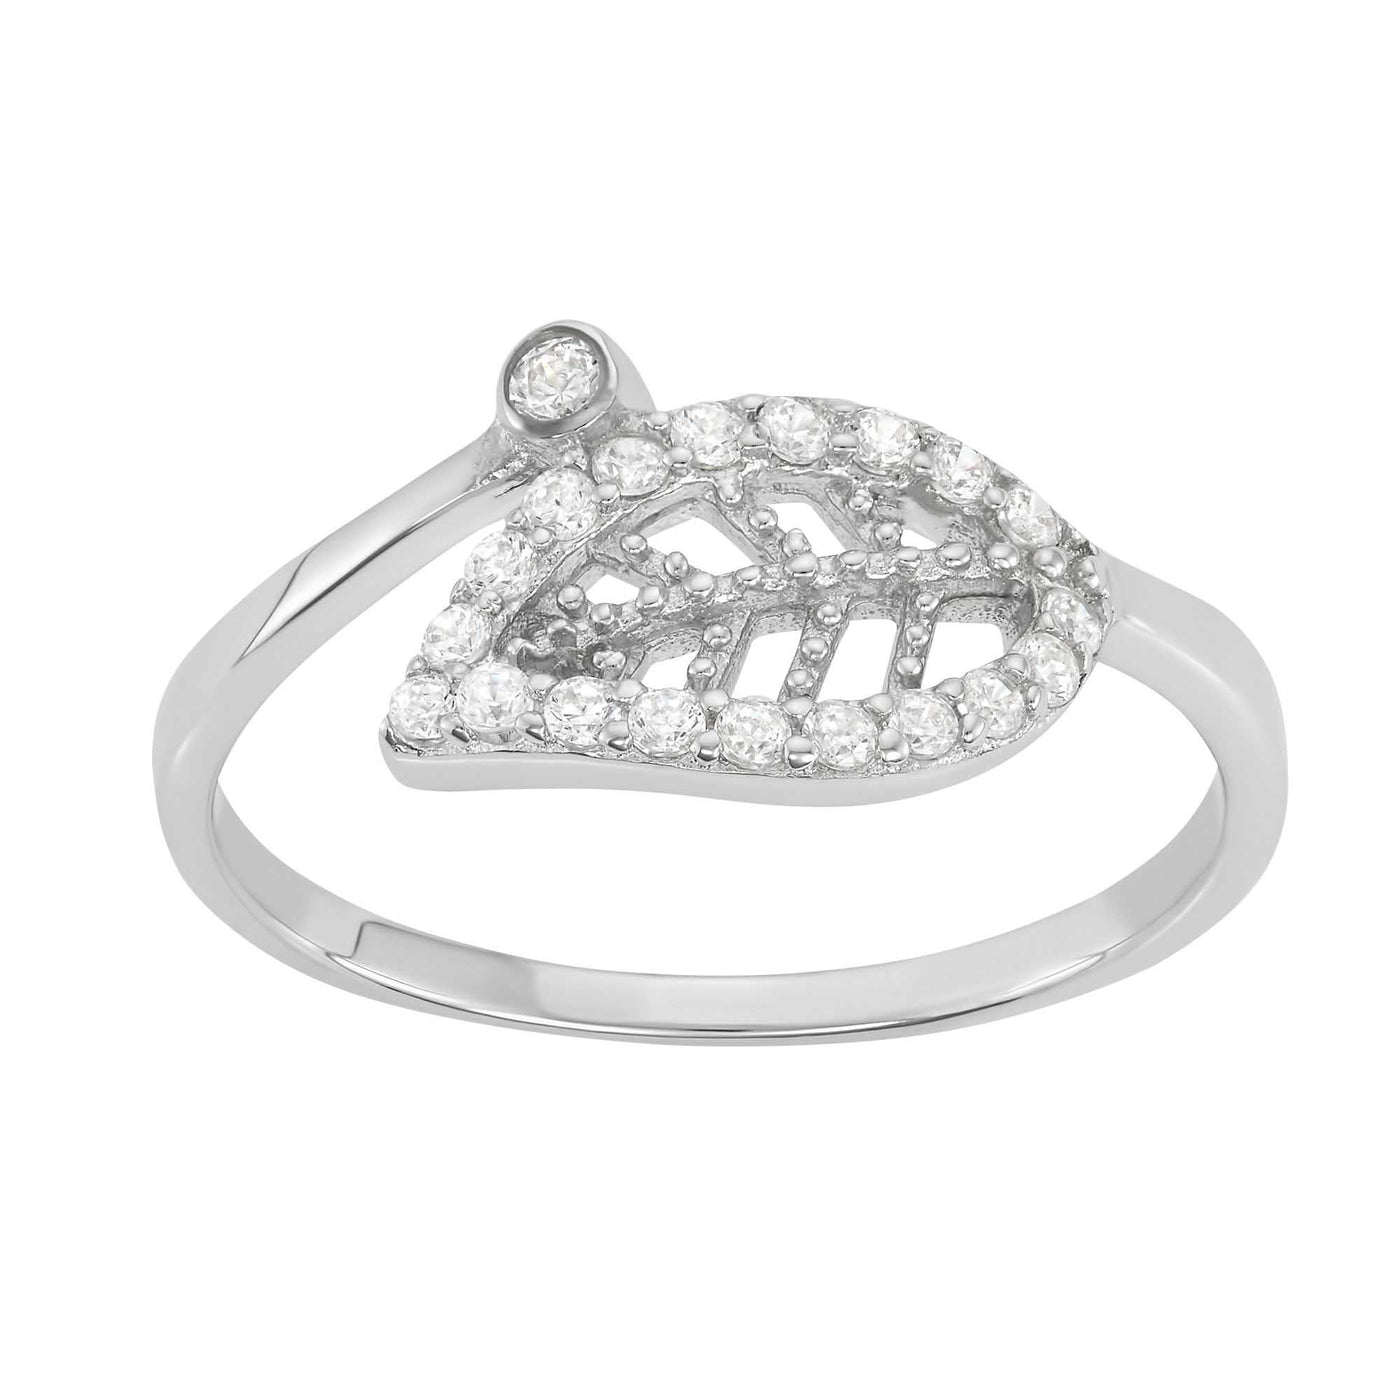 Rebecca Sloane Sterling Silver Leaf Ring With CZ Stones